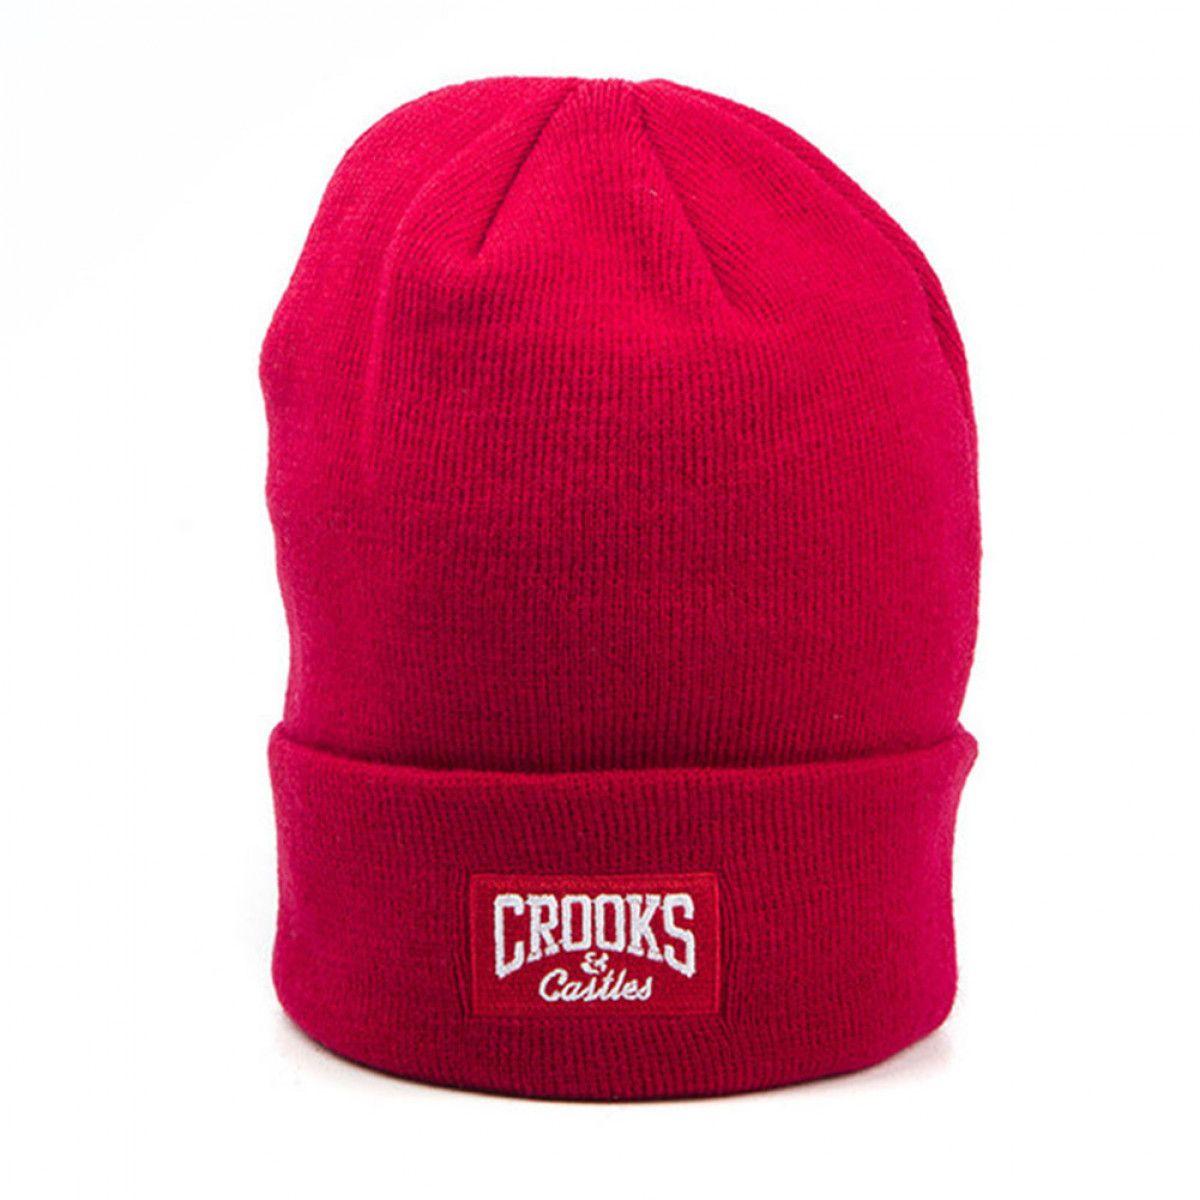 Red Crooks and Castles Logo - CROOKS & CASTLES CORE LOGO KNIT BEANIE - RED - English